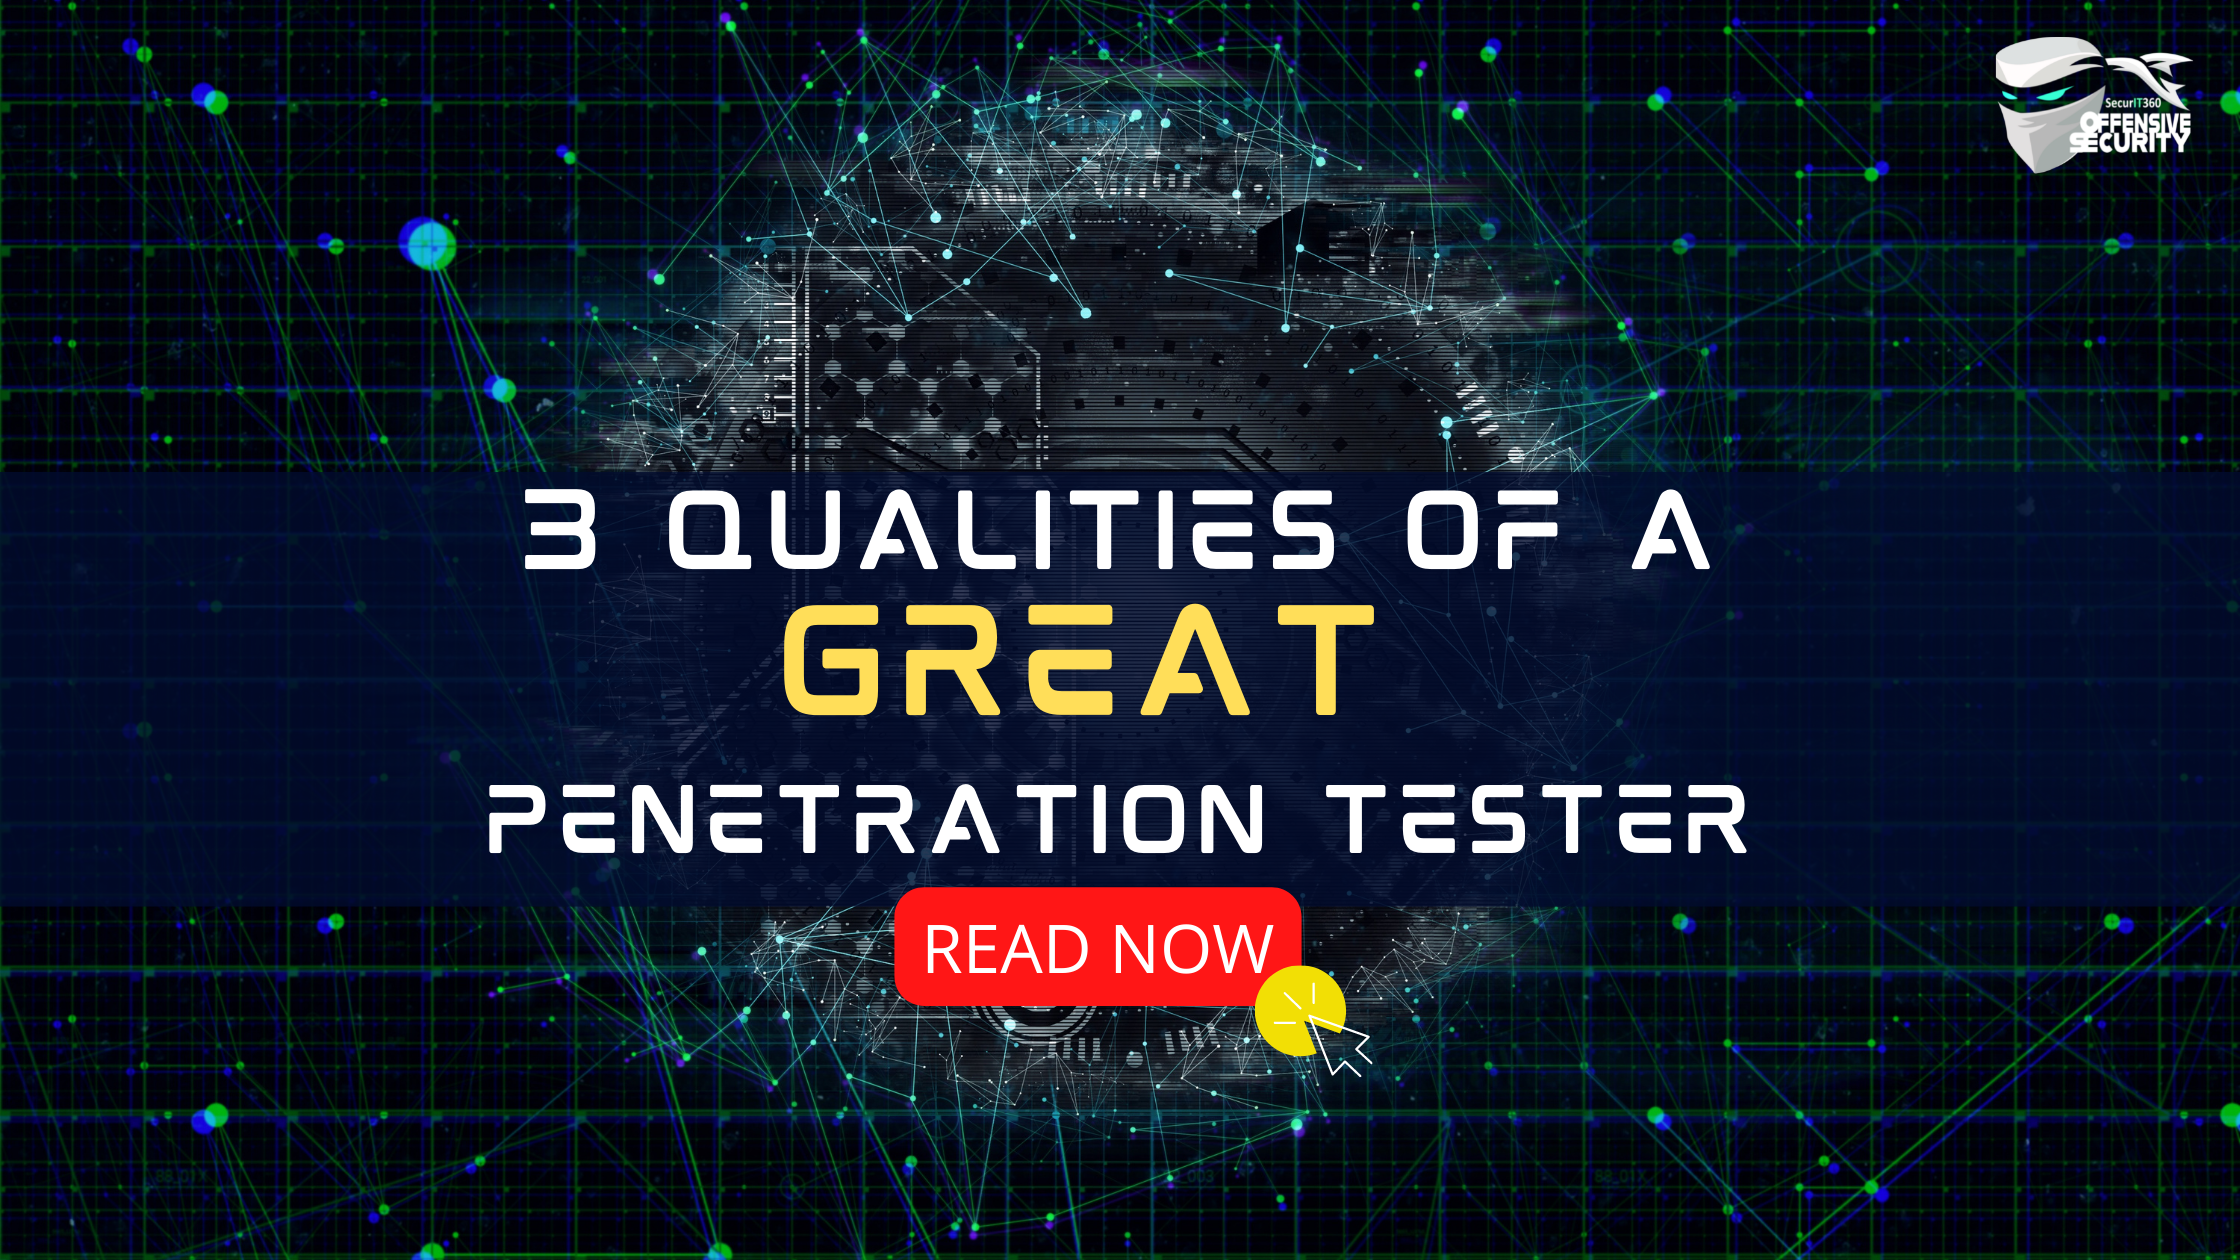 3 Qualities of a Great Penetration Tester